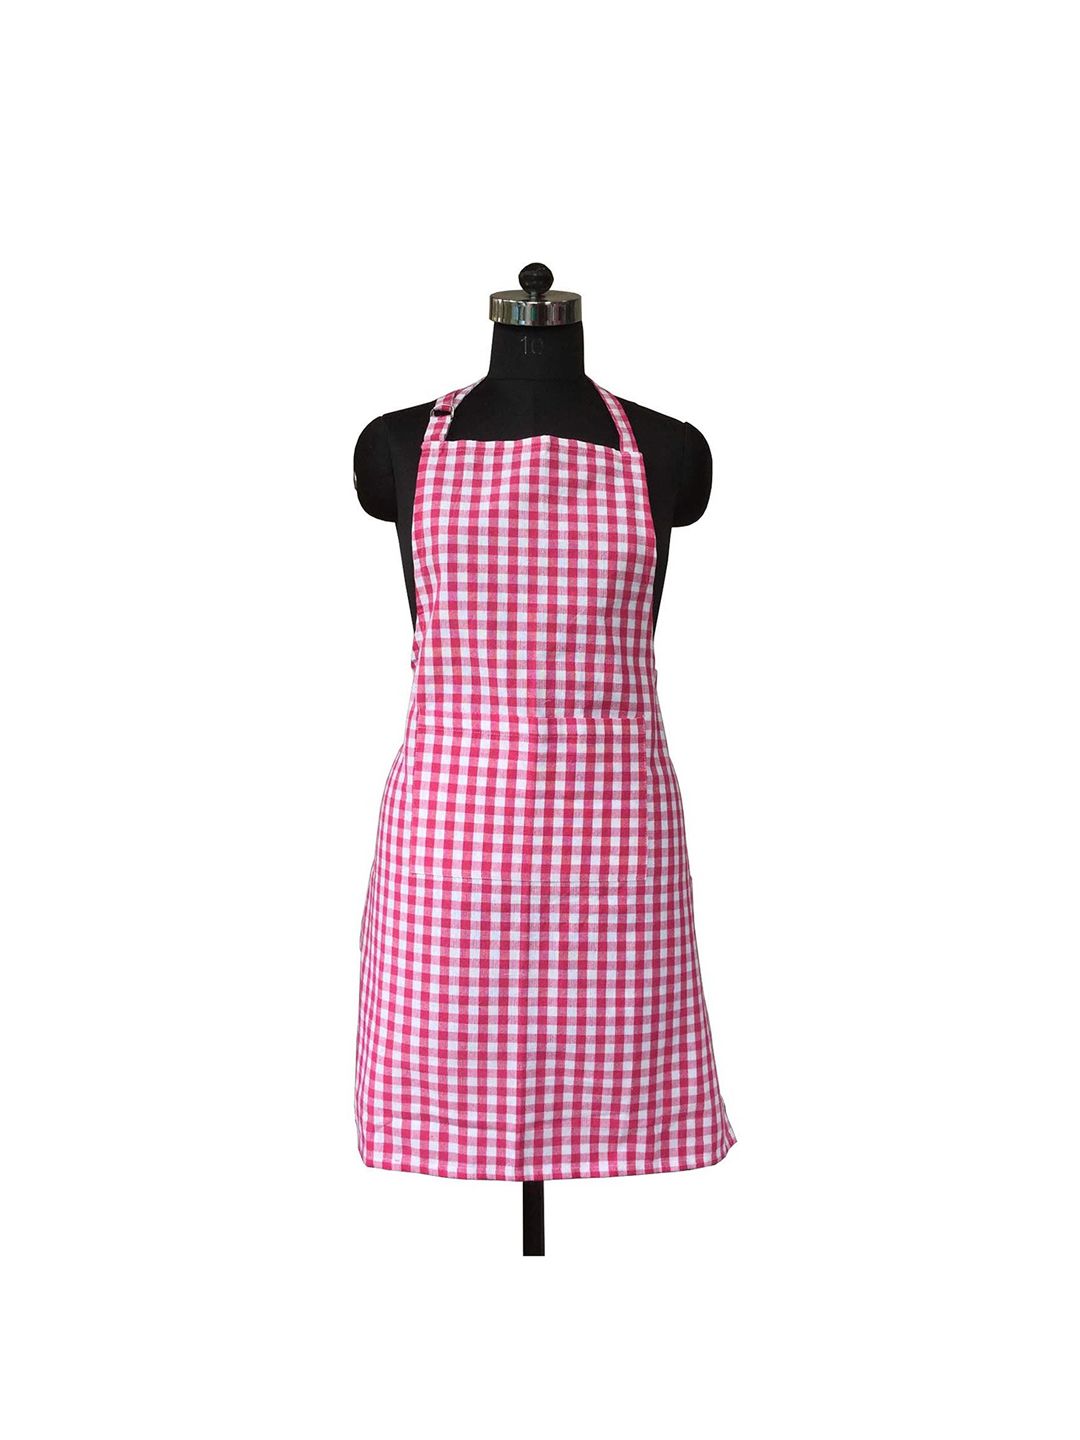 Lushomes Pink & White Checked Cotton Apron with Pocket & Adjustable Buckle Price in India